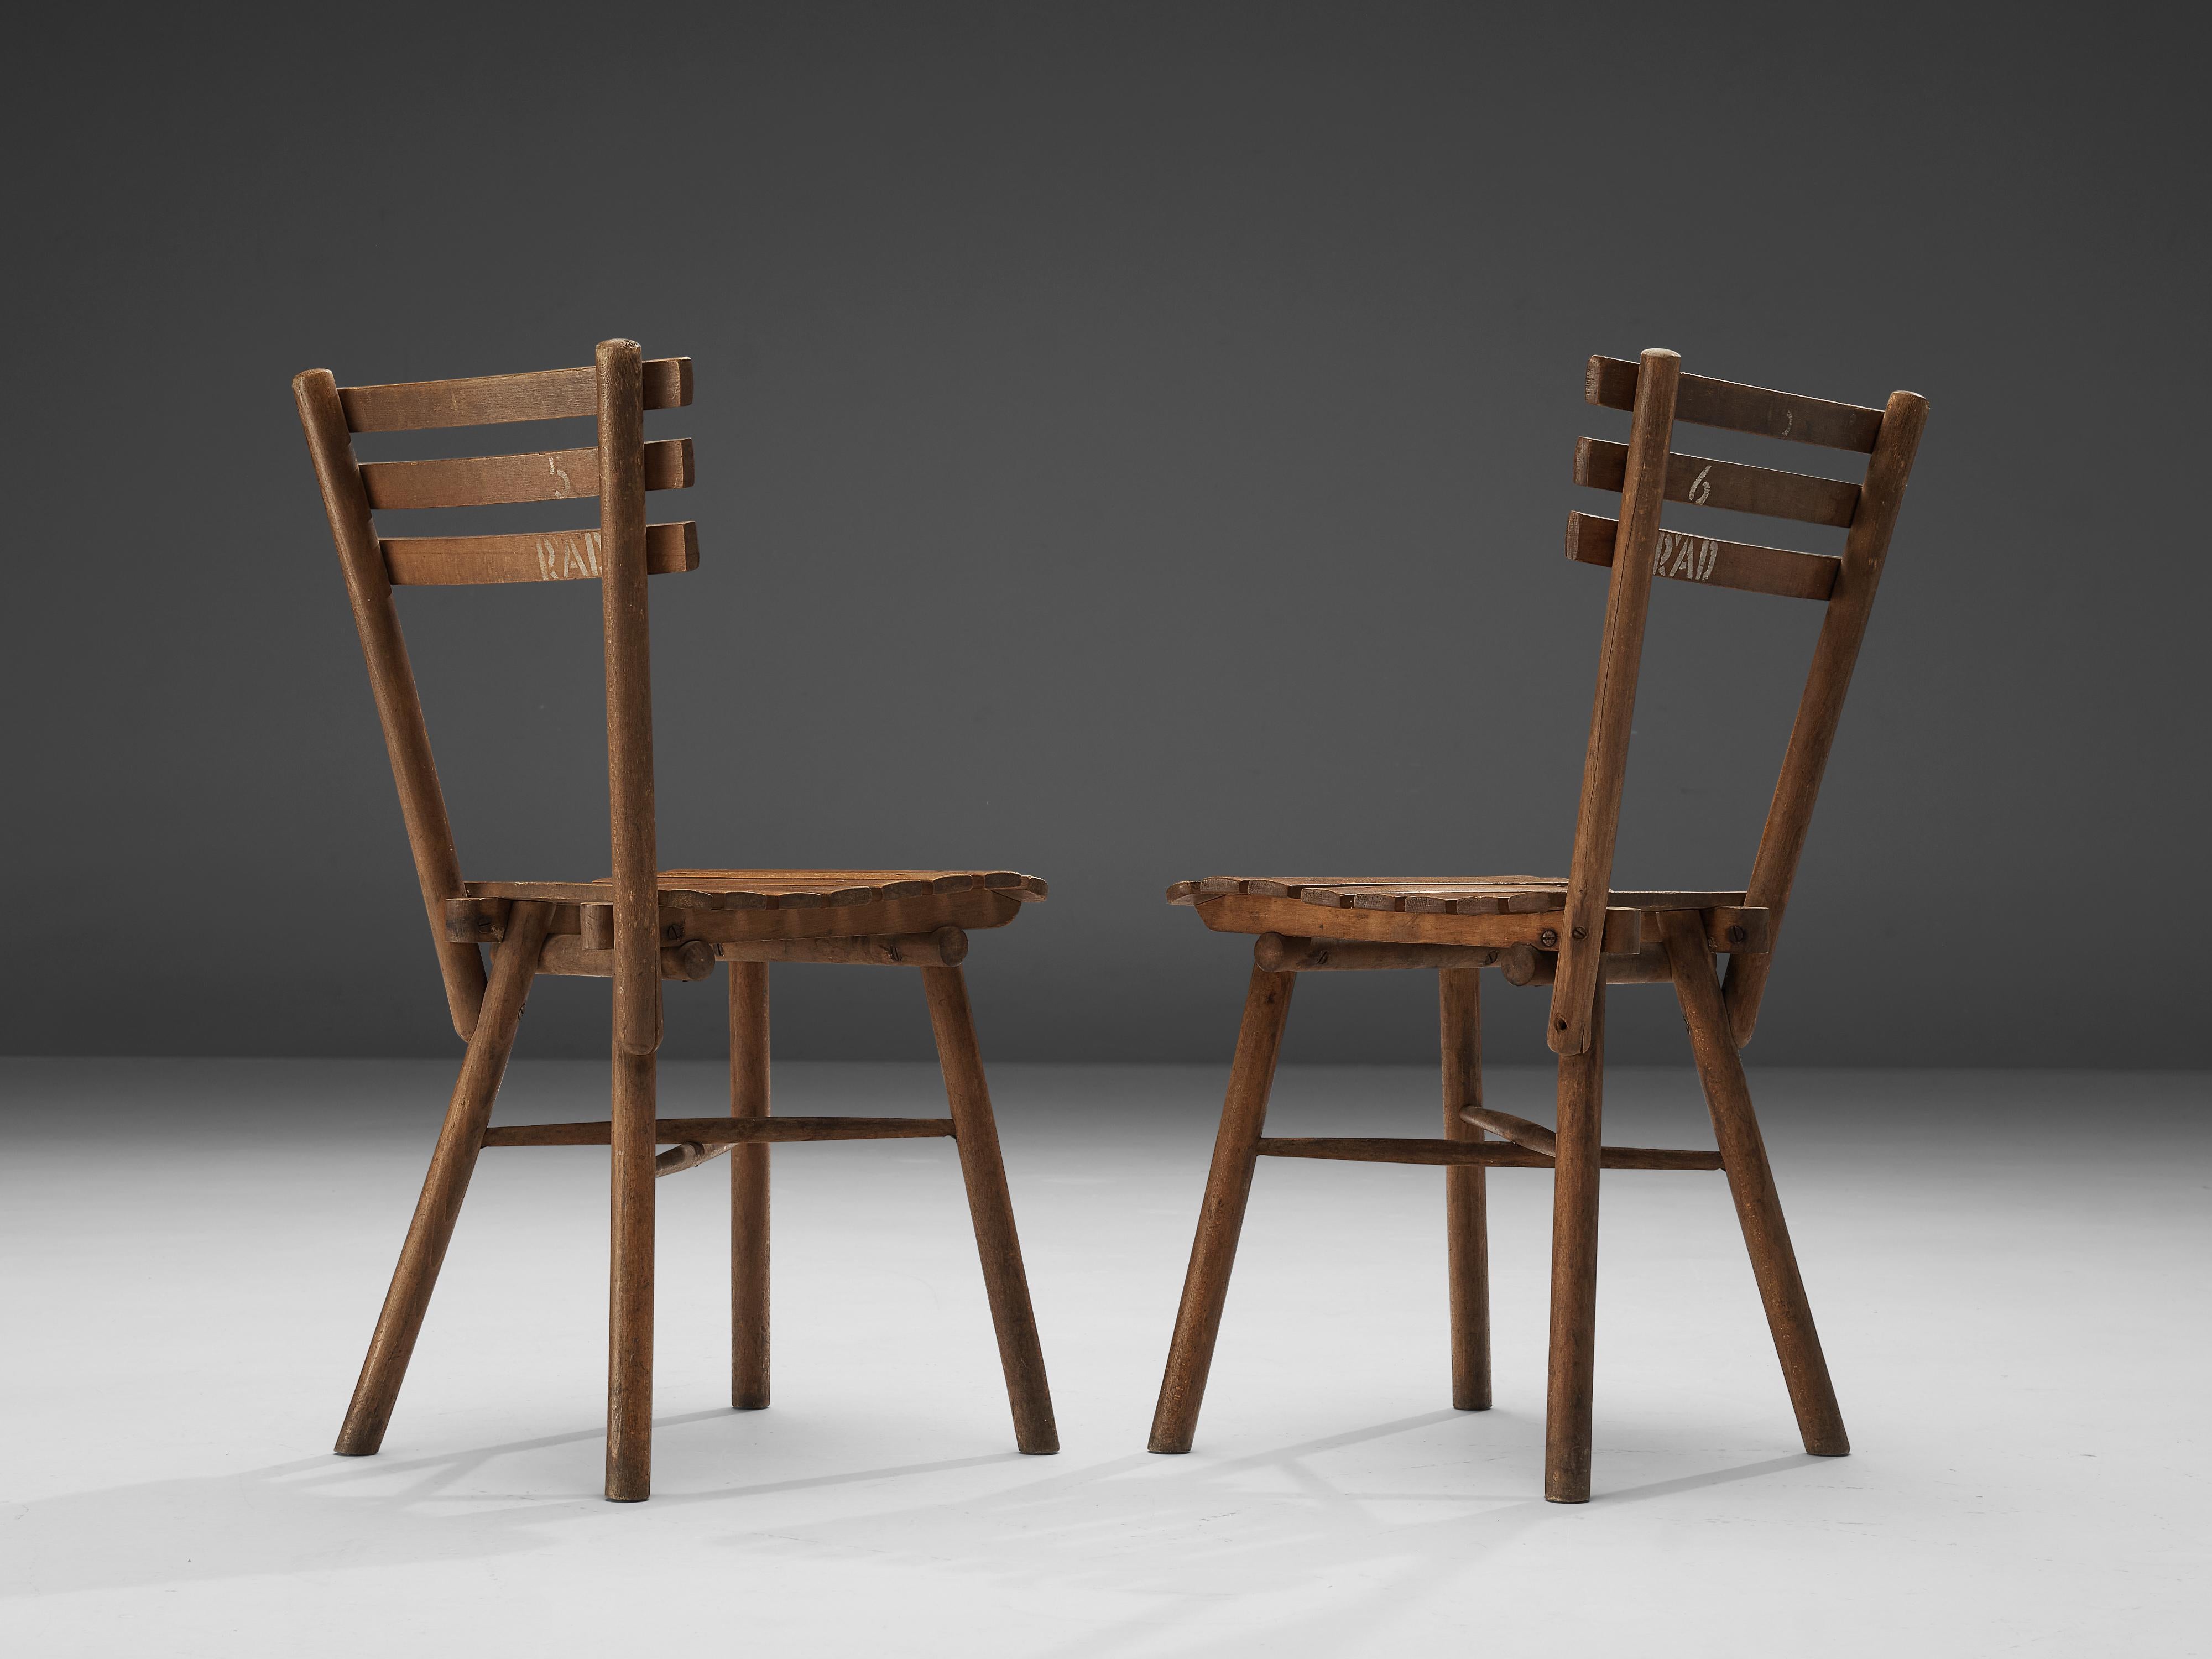 Austrian Thonet Slat Chairs in Patinated Wood